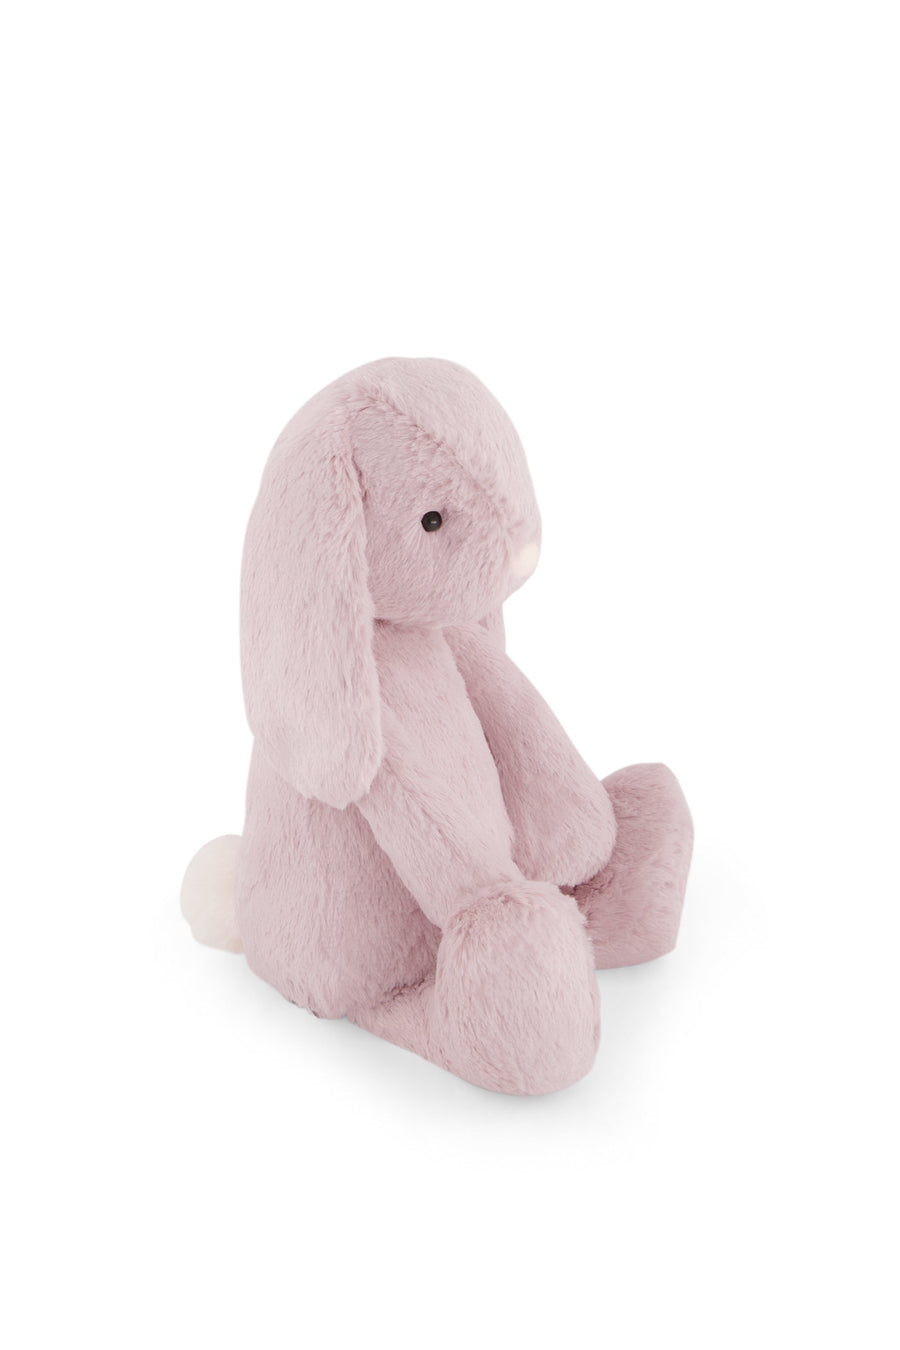 Snuggle Bunnies - Penelope the Bunny - Blossom Childrens Toy from Jamie Kay NZ